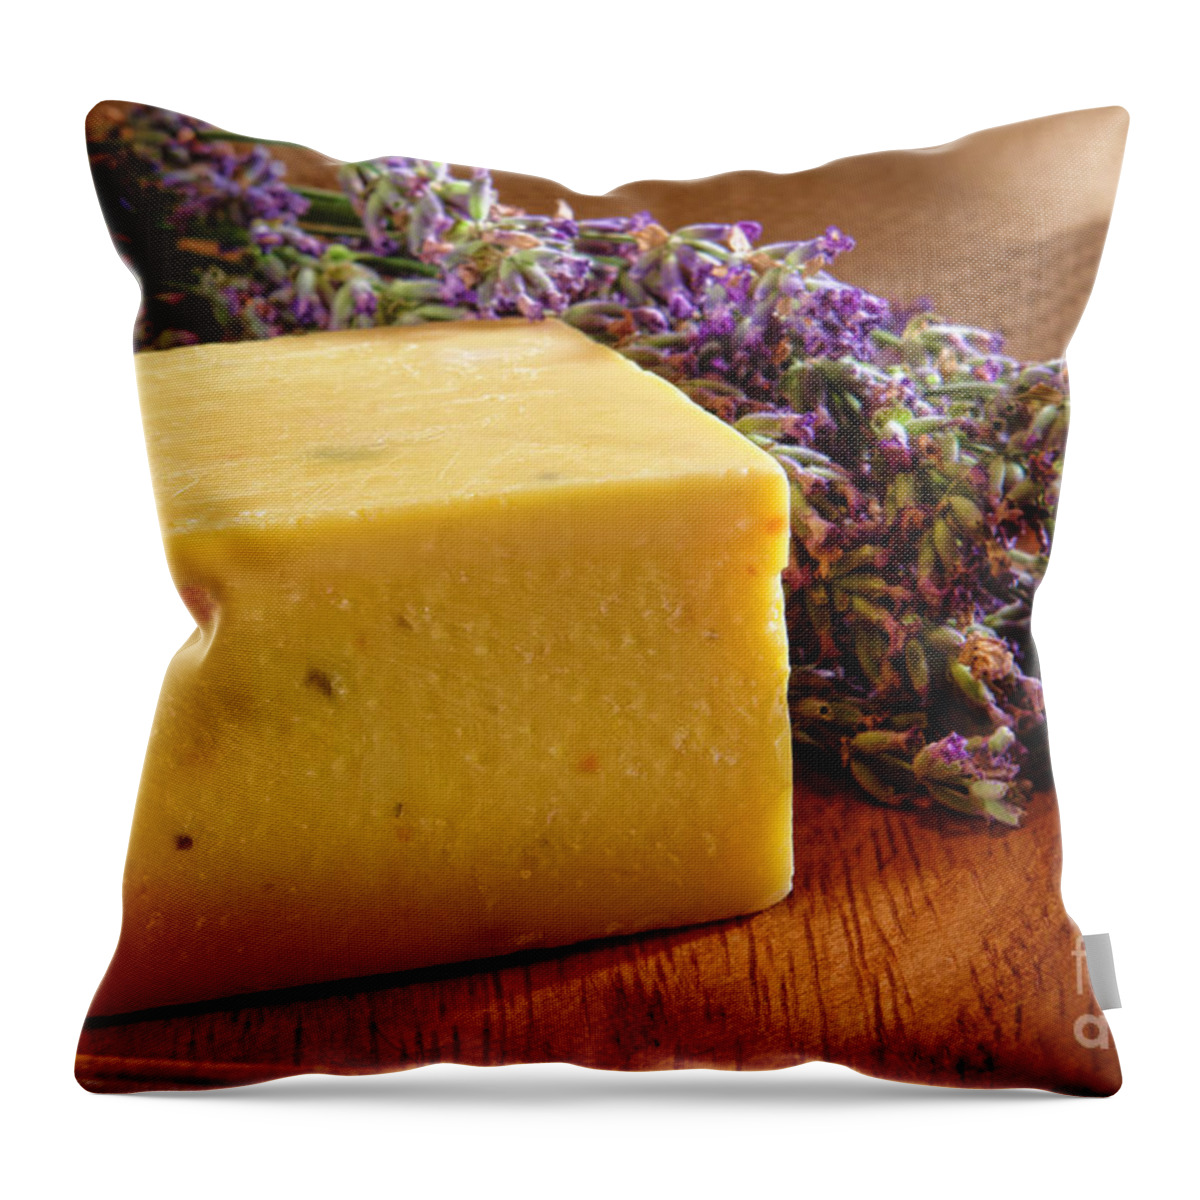 Aromatherapy Throw Pillow featuring the photograph Aromatherapy Natural Soap and Lavender by Olivier Le Queinec